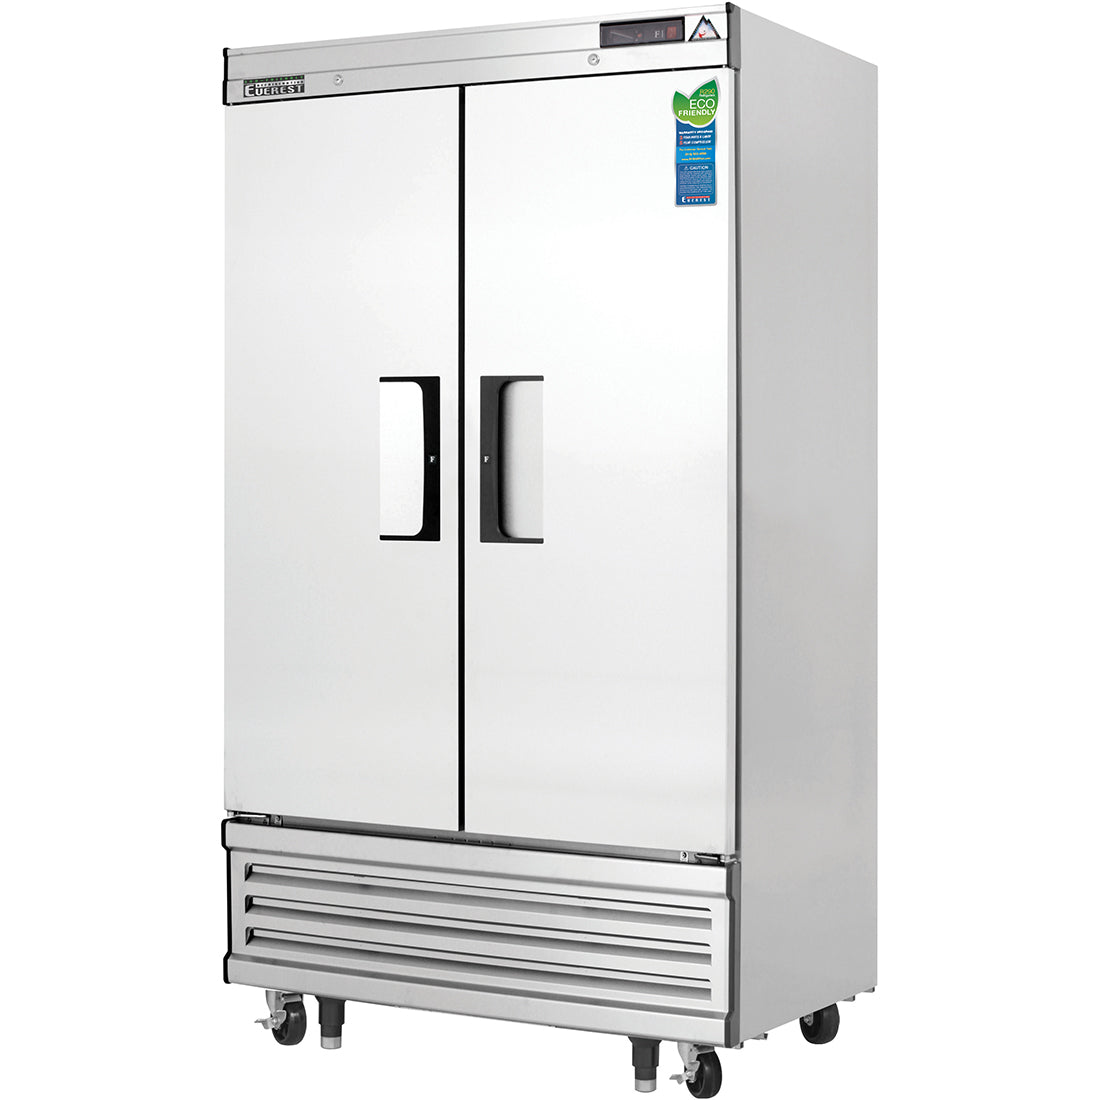 Everest EB Series-EBNF2 Two Section Solid Door Upright Reach-In Freezer - 33 Cu. Ft.